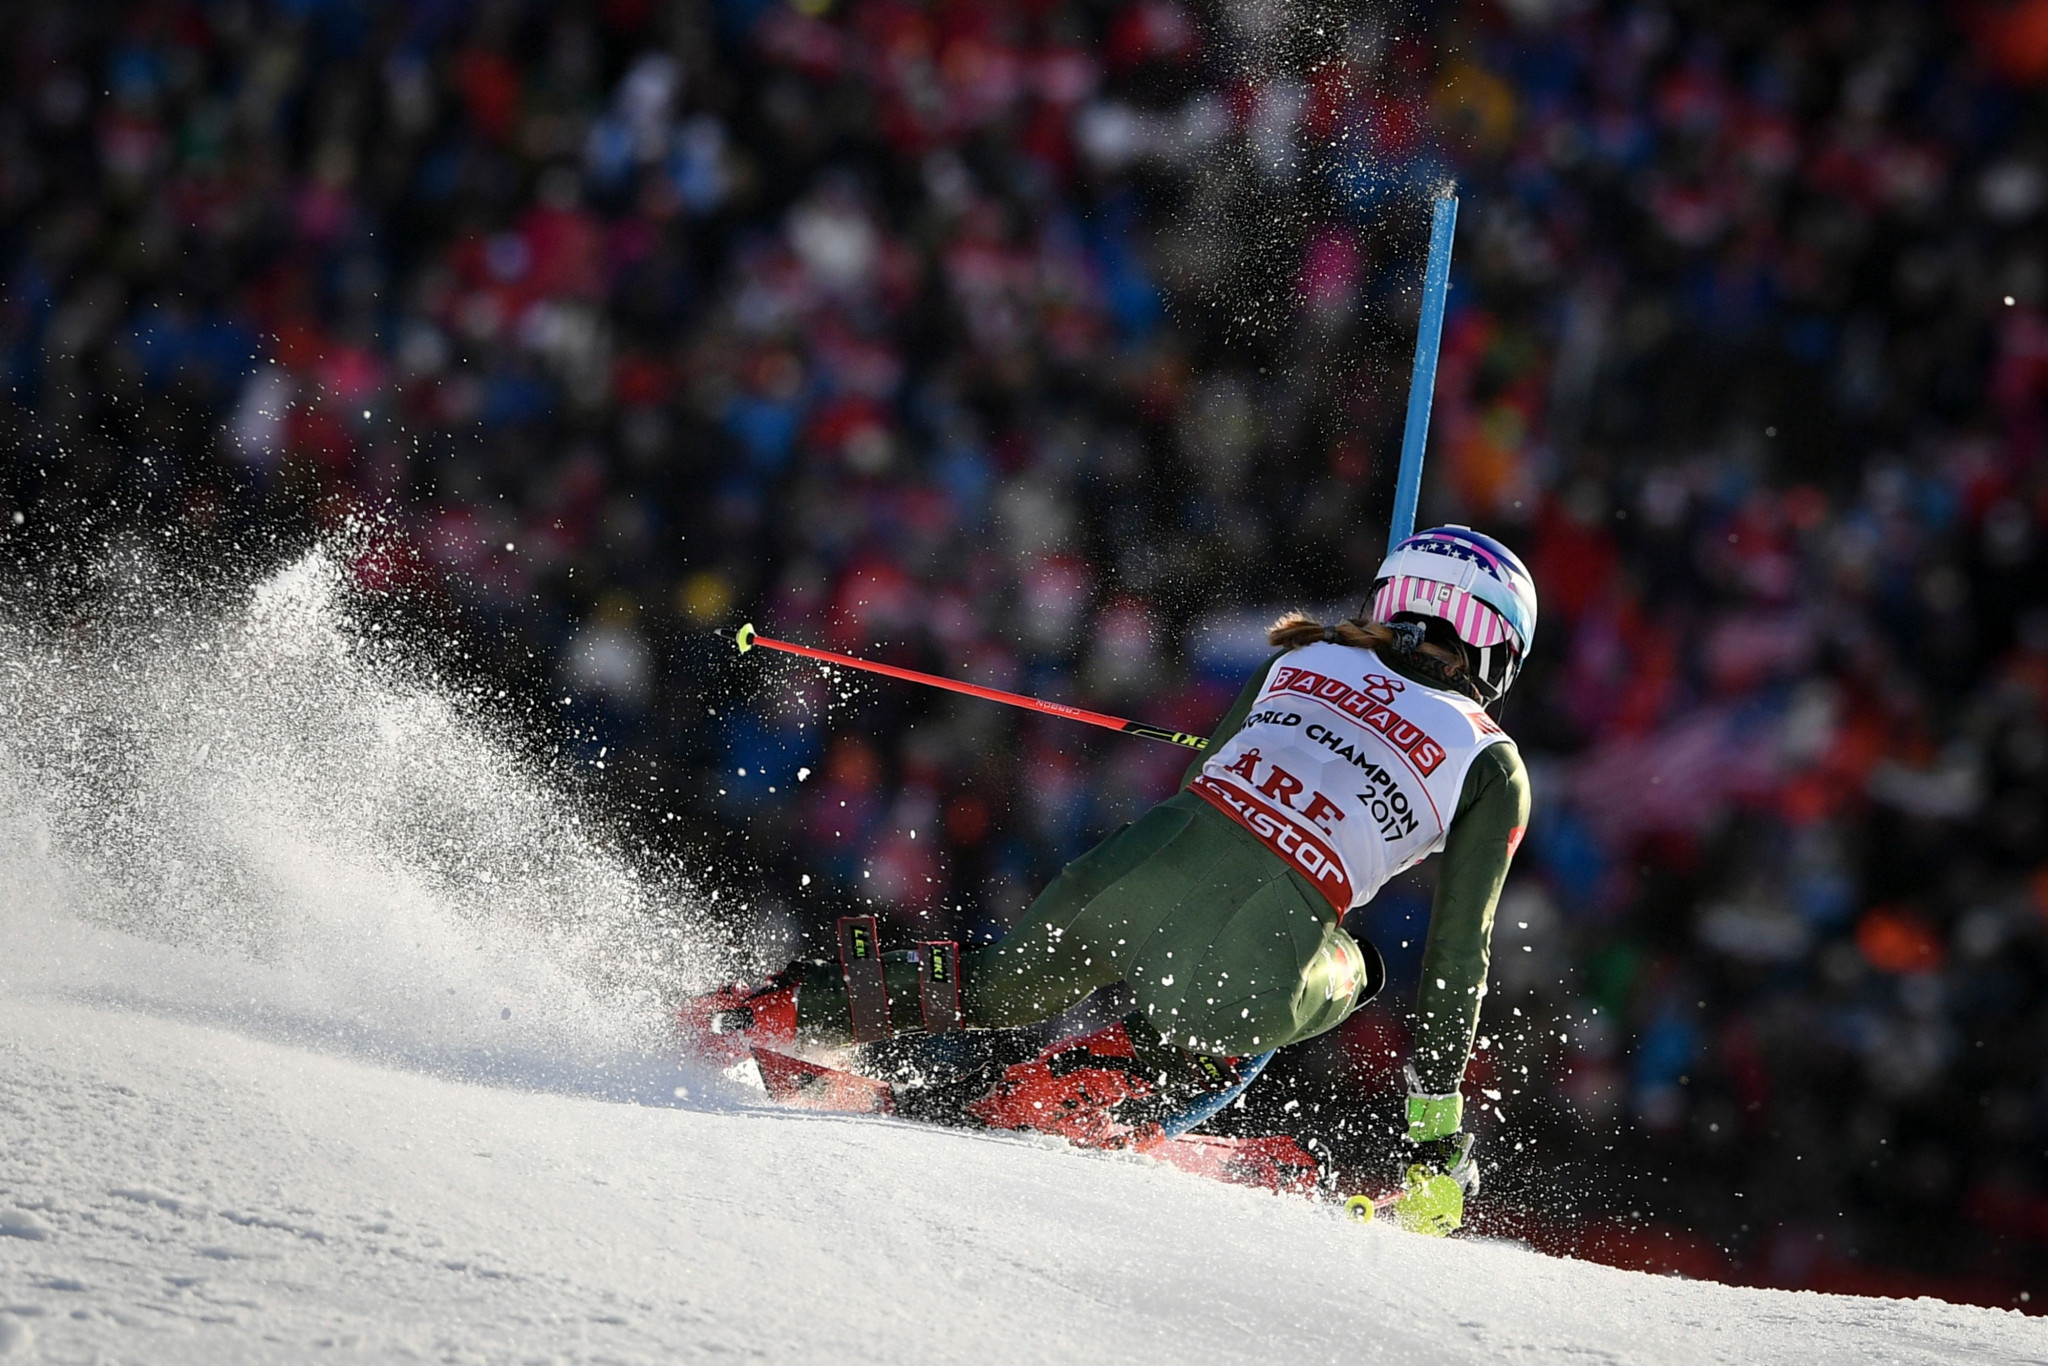 America's Mikaela Shiffrin was criticial of conditions during this year's FIS Alpine World Ski Championships in Åre ©Getty Images